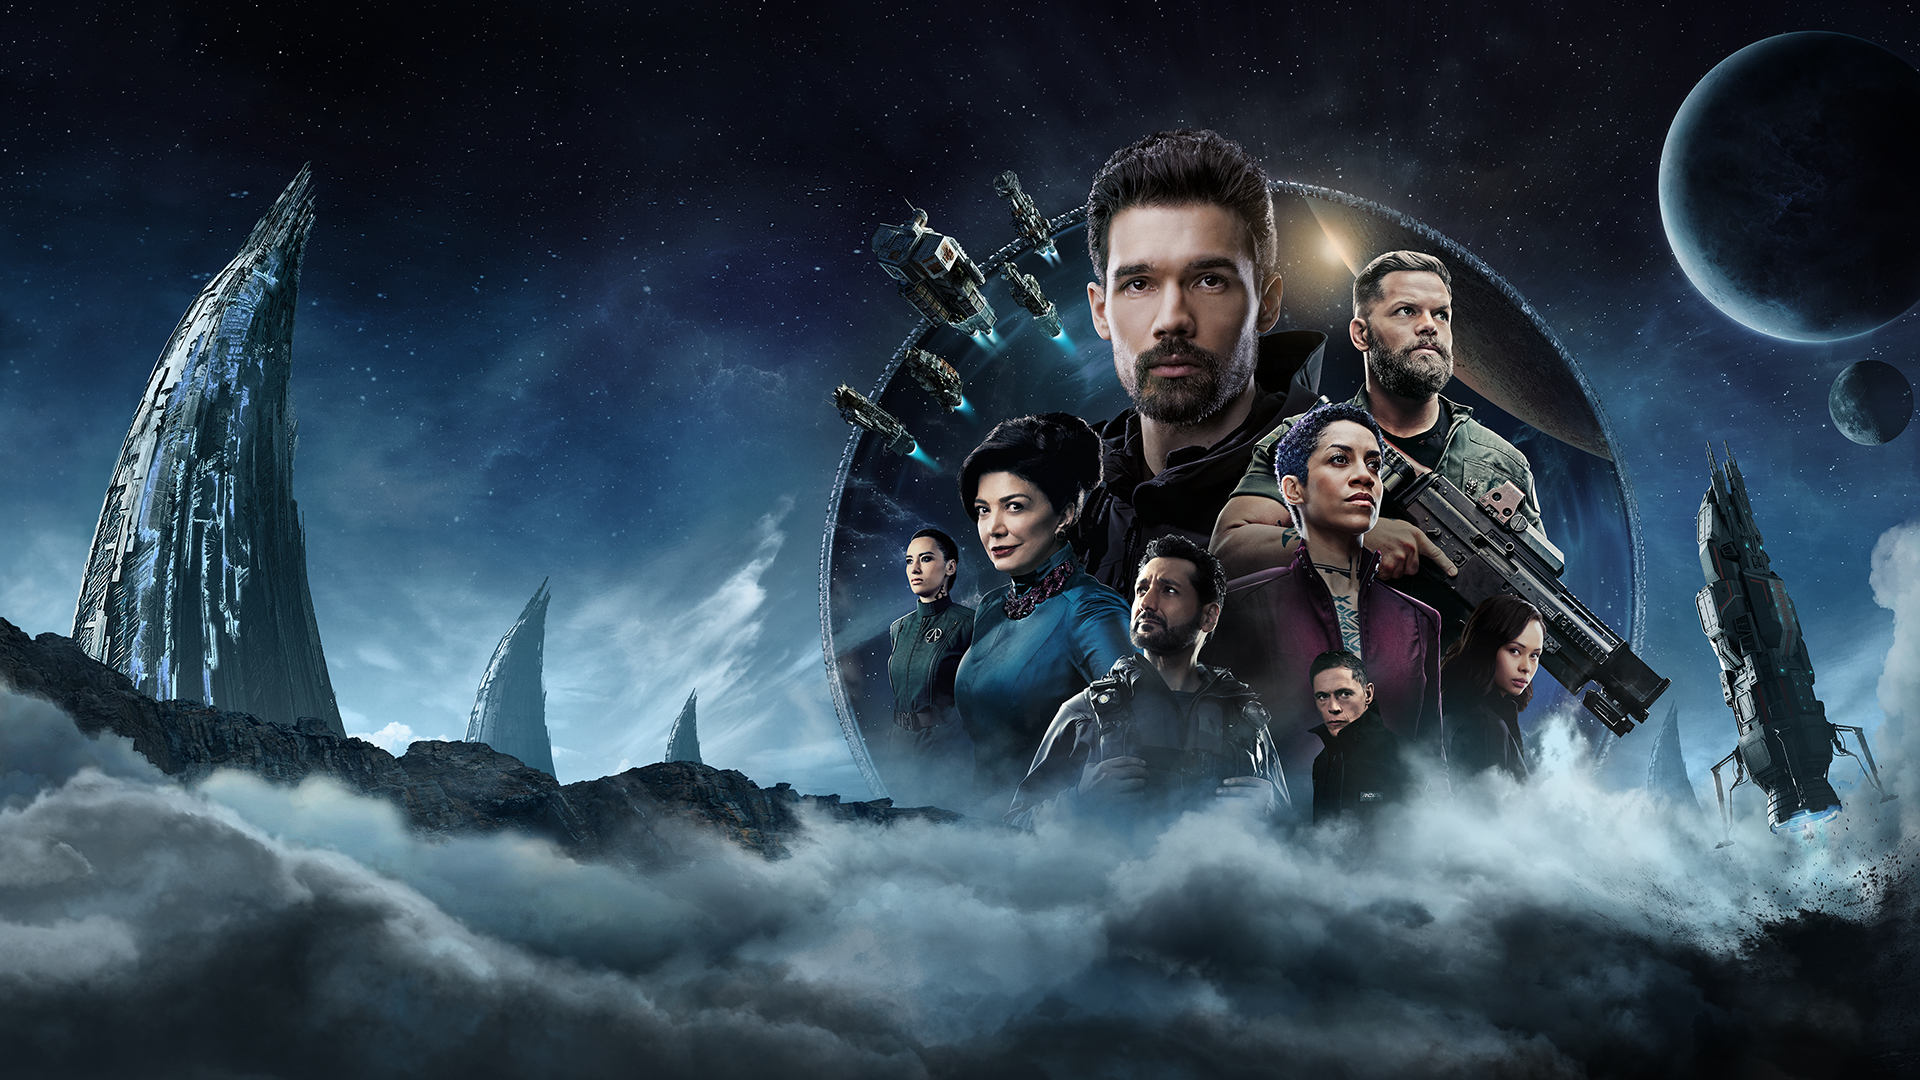 Download The Expanse (Season 1-6) [S06E06 Added] {English With Subtitles} BluRay 720p [500MB]